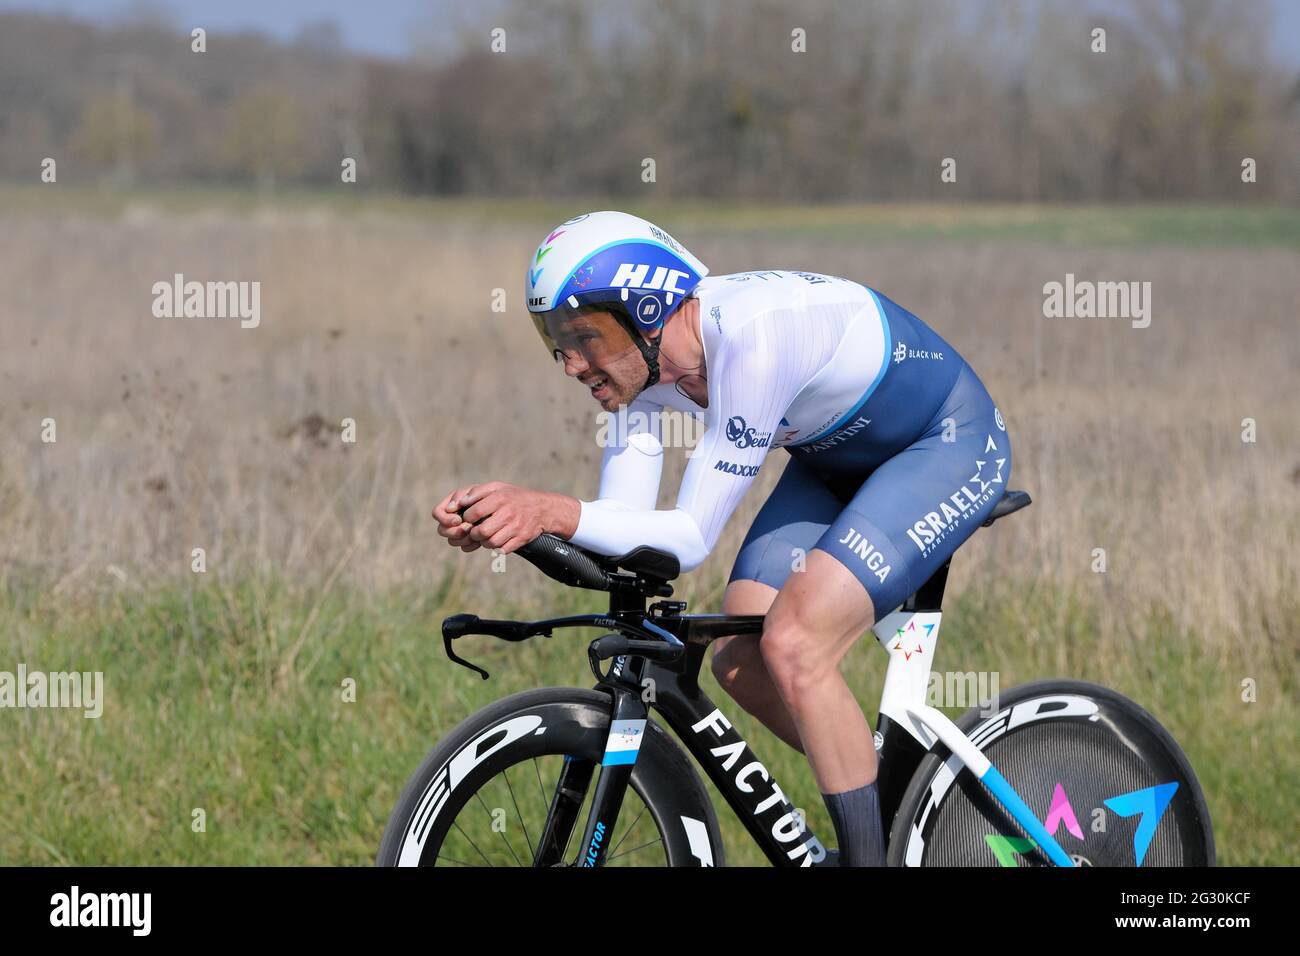 Belgian rider Sepp Vanmarcke (Team Israel Start-Up Nation) seen in action  during the individual time trial. He finished the 73rd stage, 1'02" behind  the winner. He finishes 52nd of the final overall